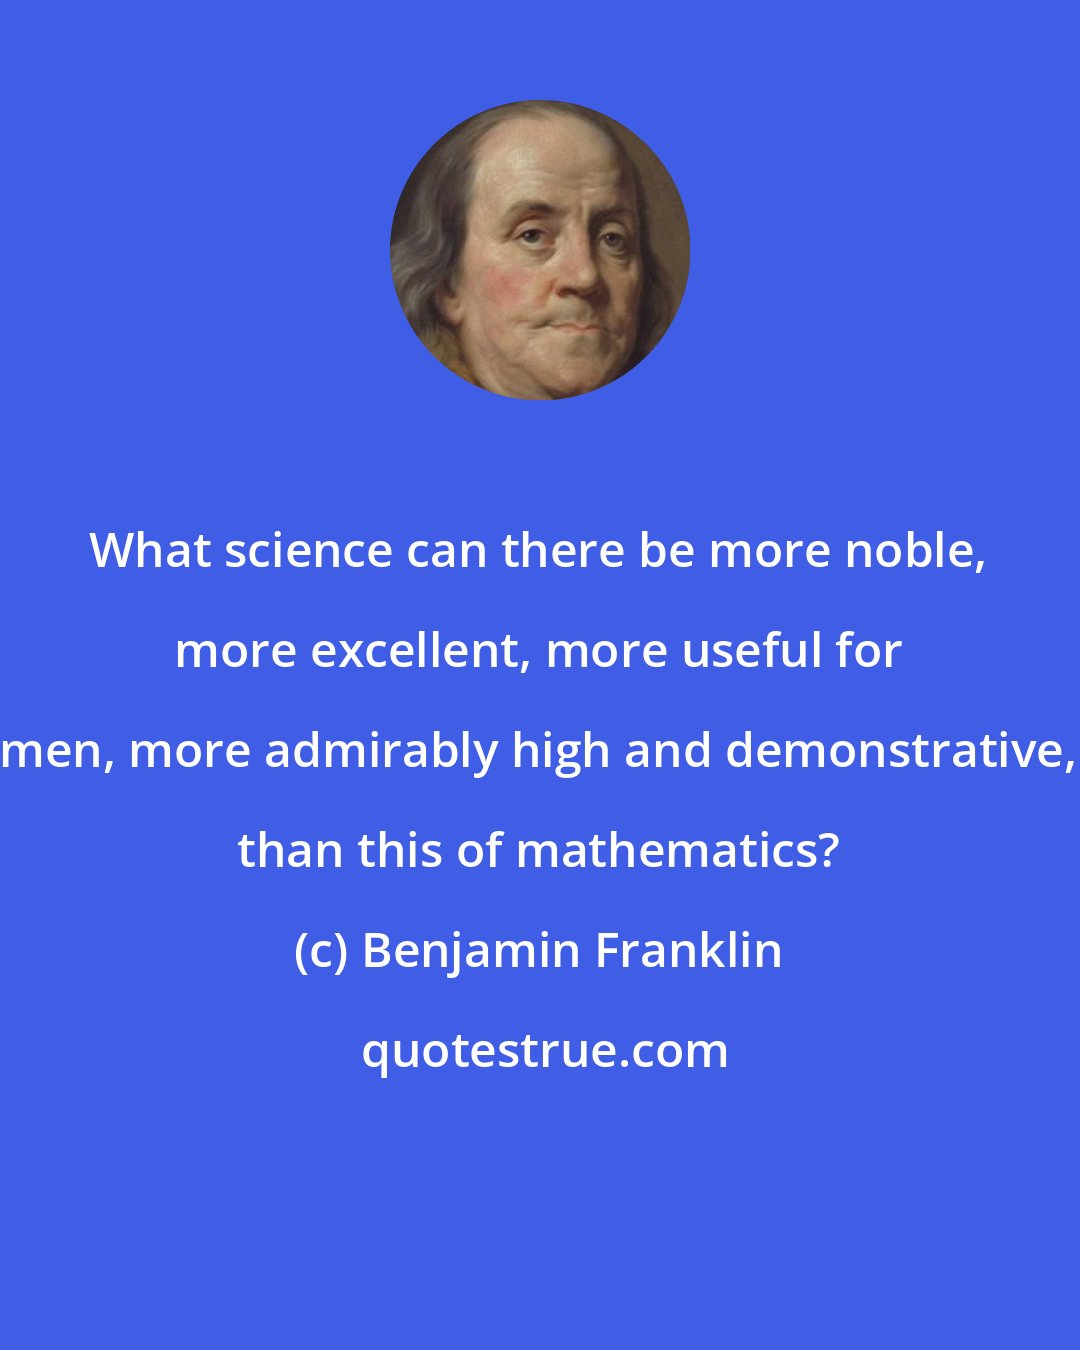 Benjamin Franklin: What science can there be more noble, more excellent, more useful for men, more admirably high and demonstrative, than this of mathematics?